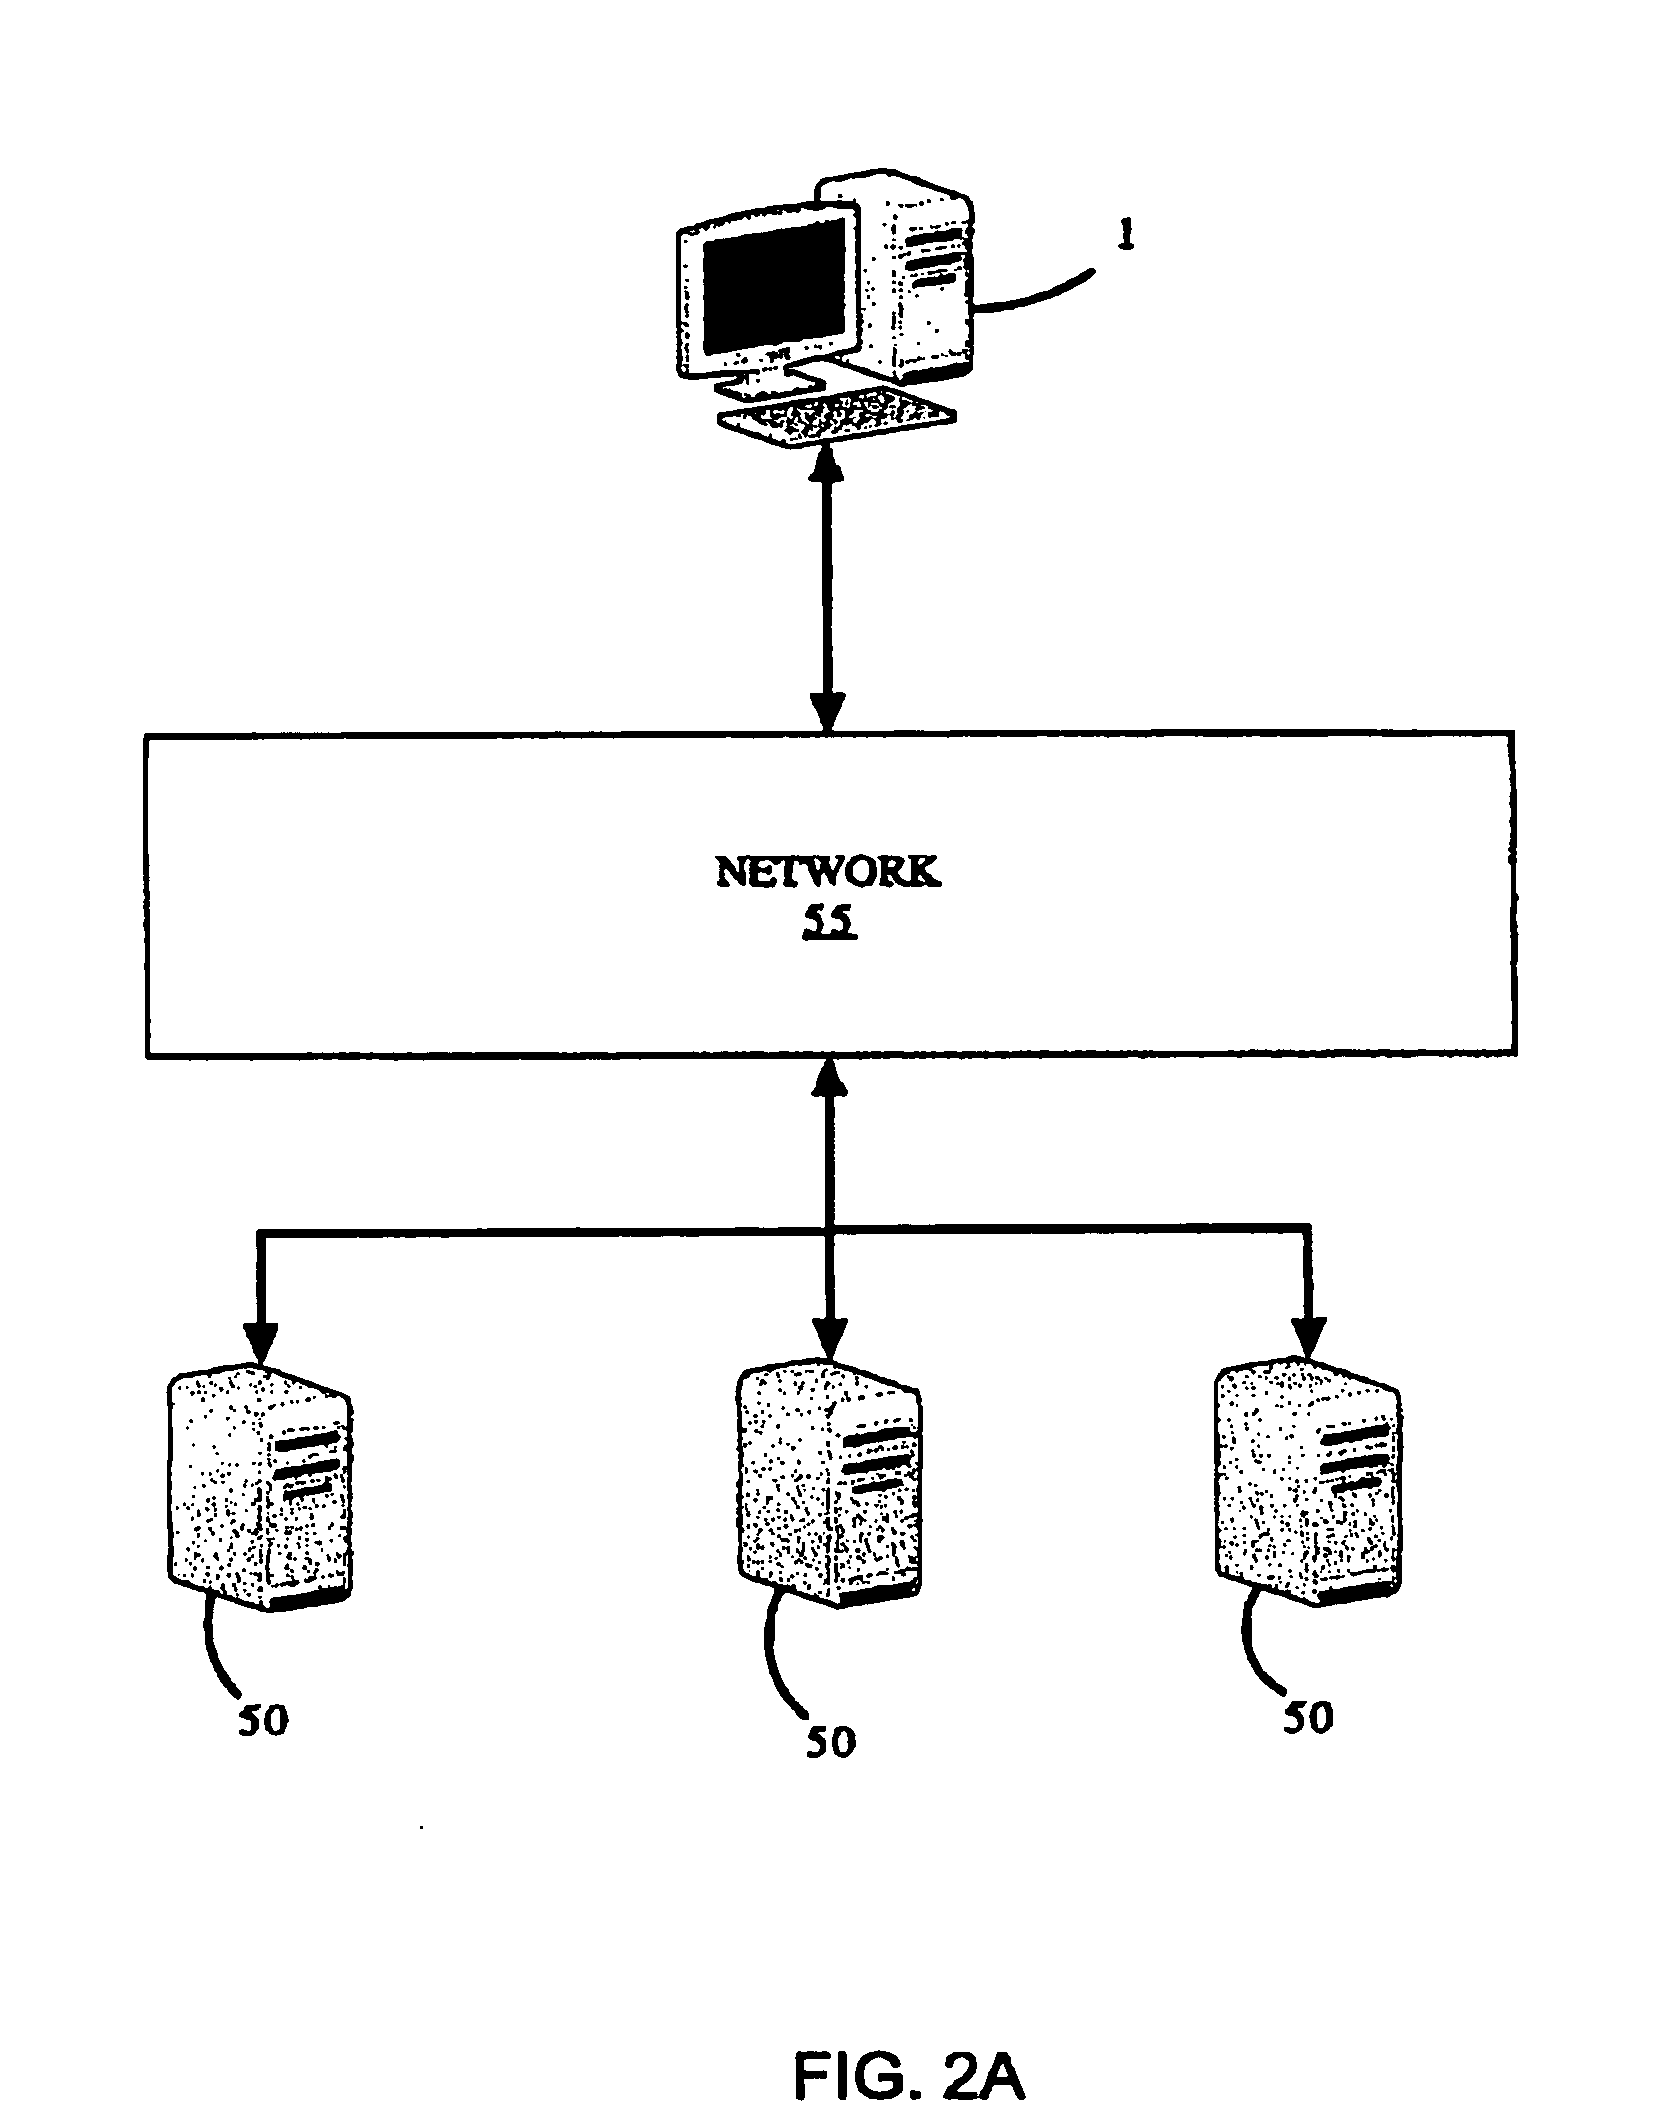 Method and apparatus for concept-based visual